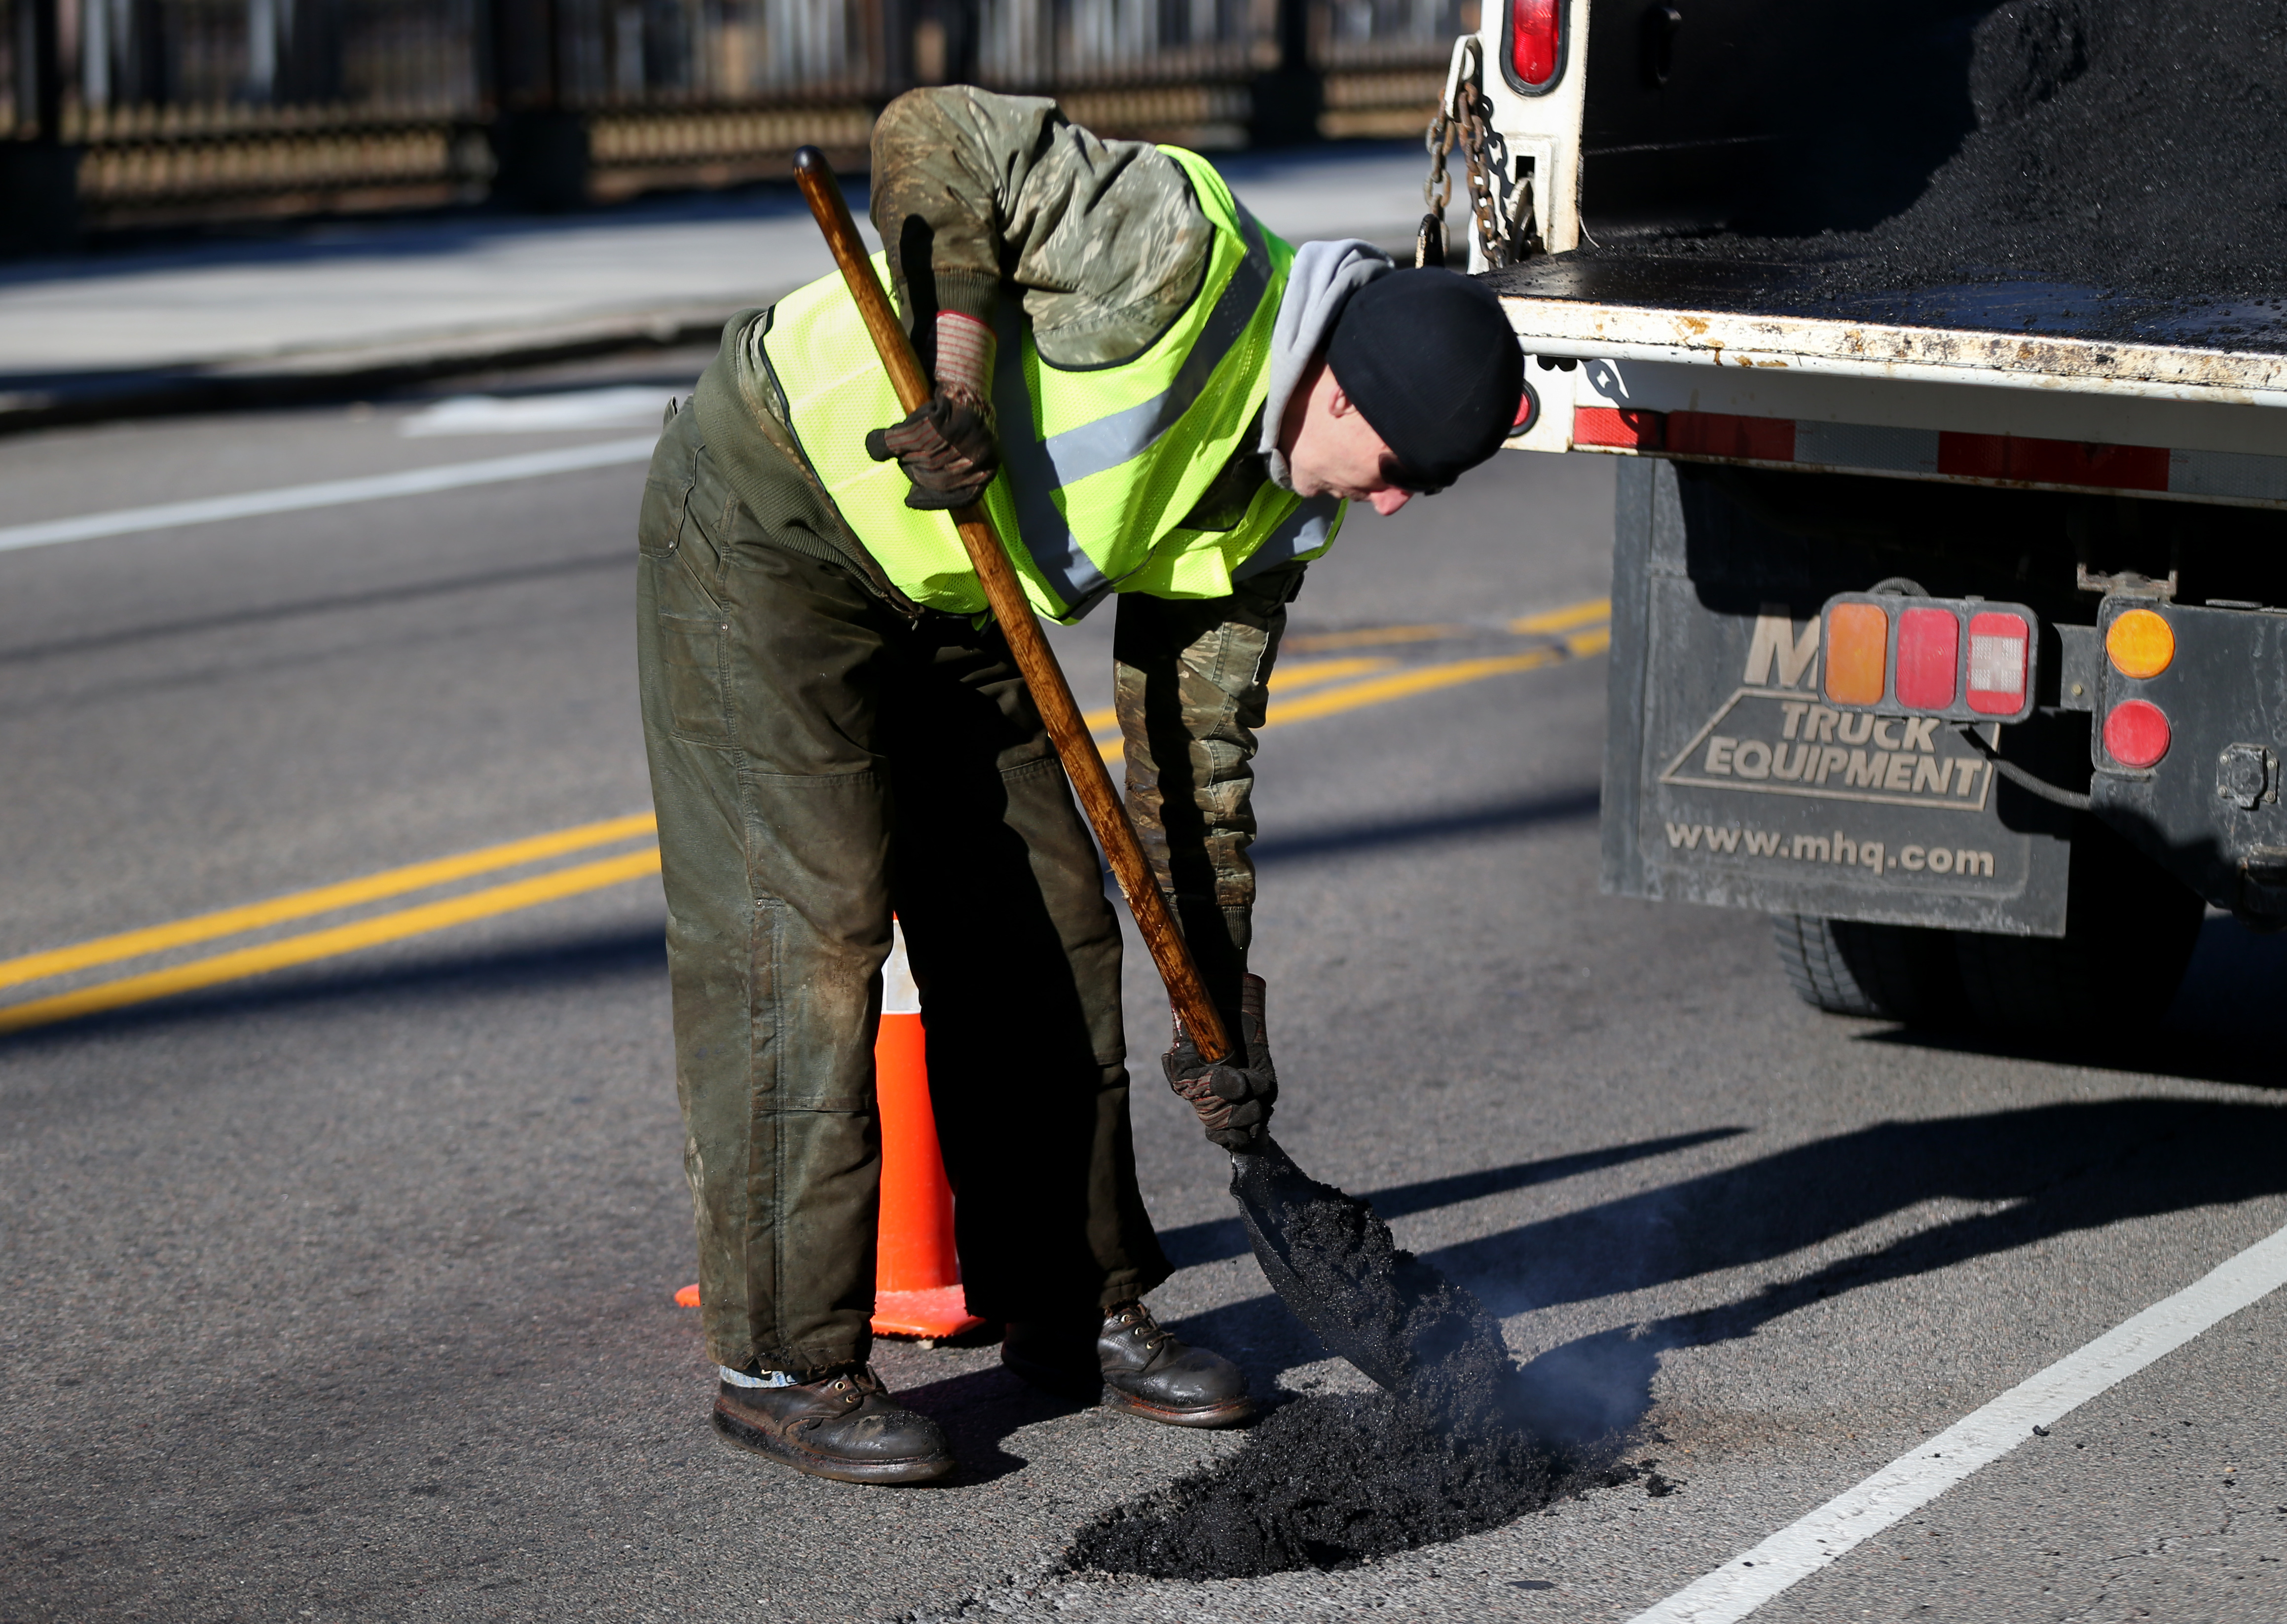 Google Is Developing a System to Map Potholes Using a Car's GPS